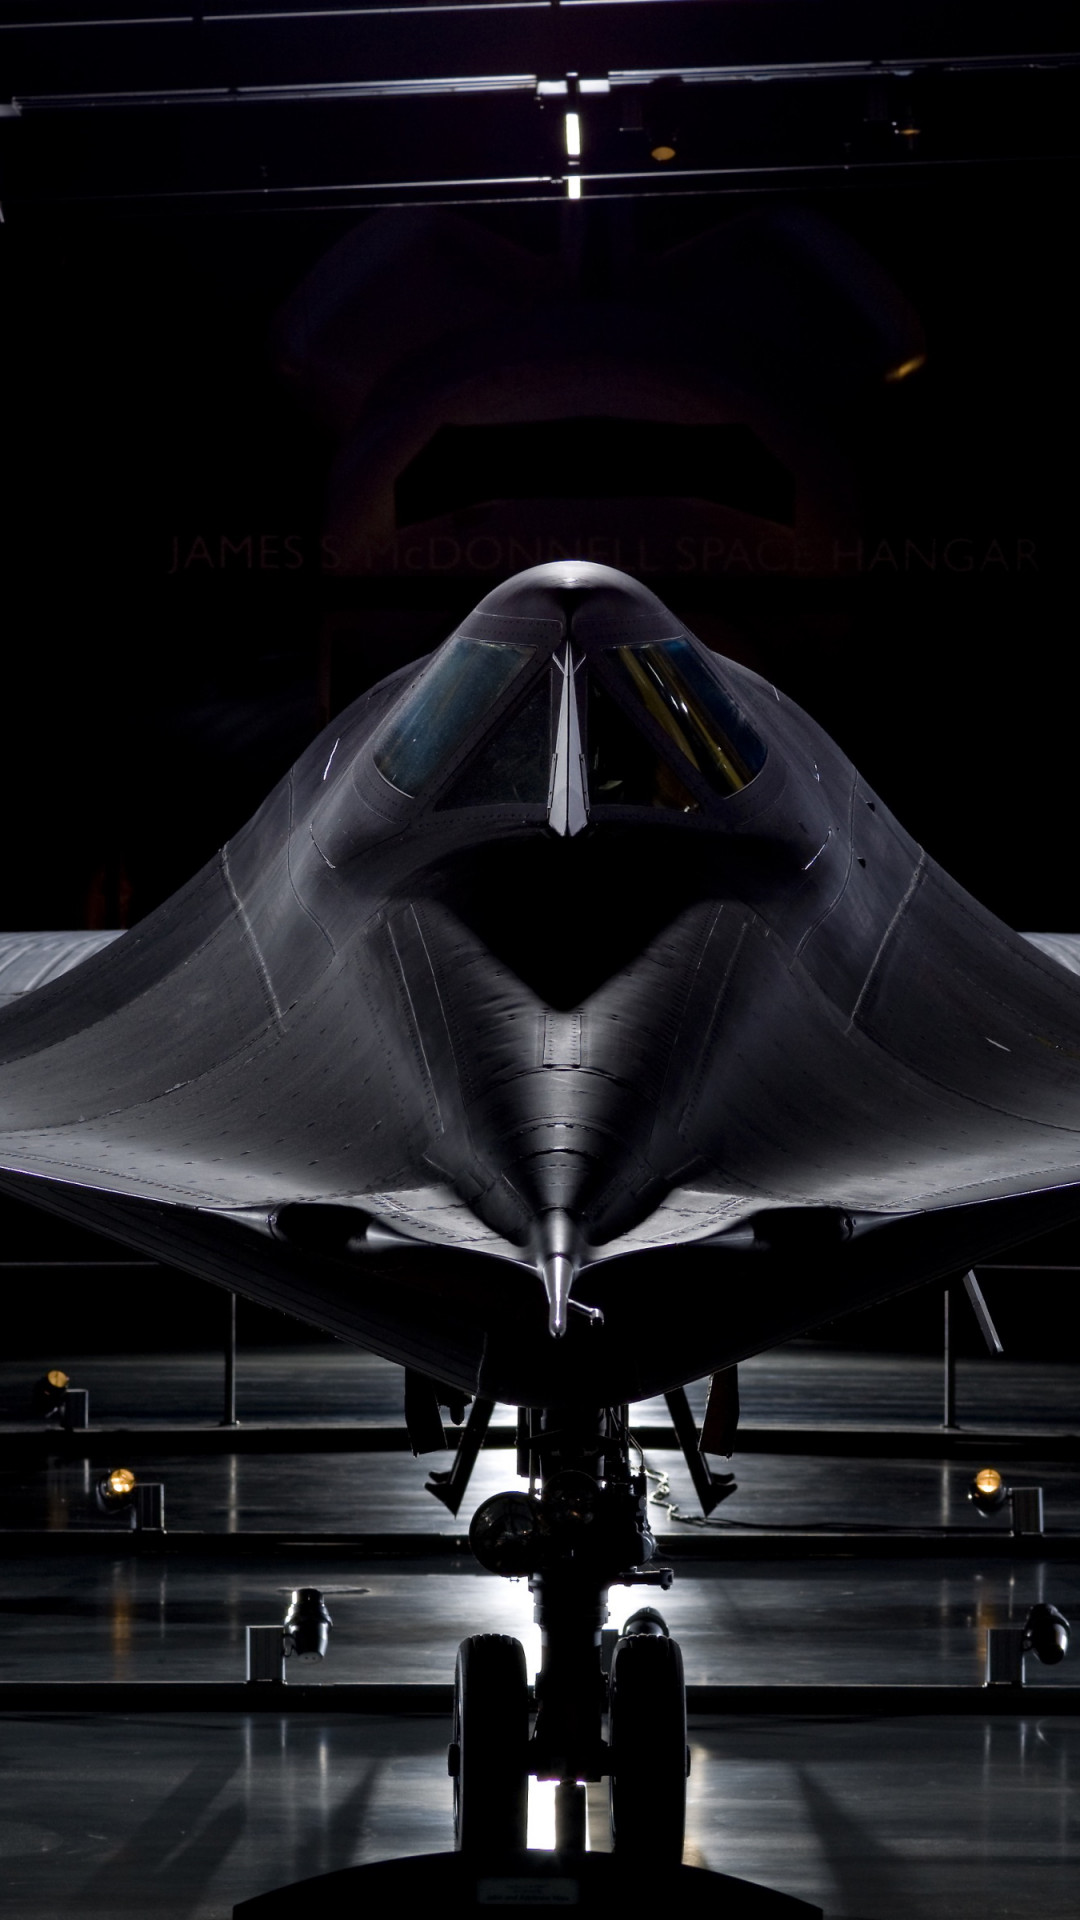 Sr71 Blackbird Wallpaper  Download to your mobile from PHONEKY